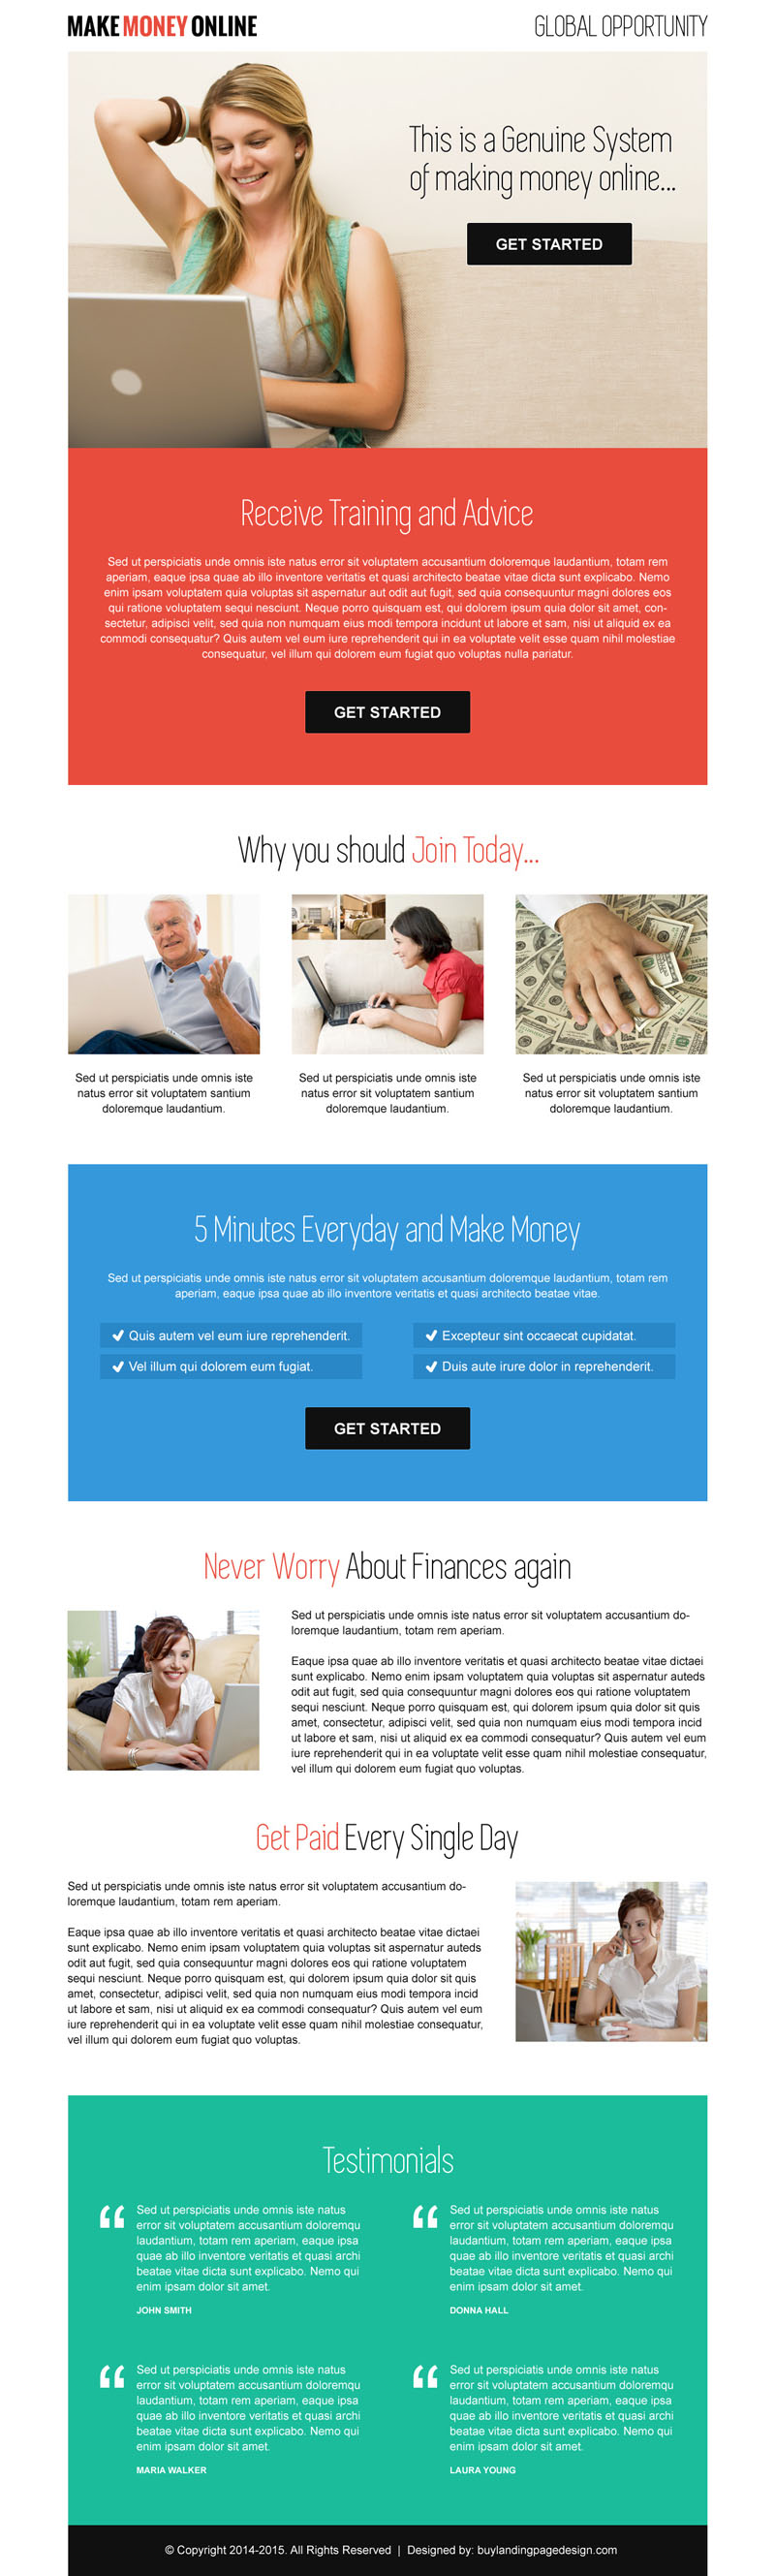 make-money-online-call-to-action-landing-page-design-templates-021